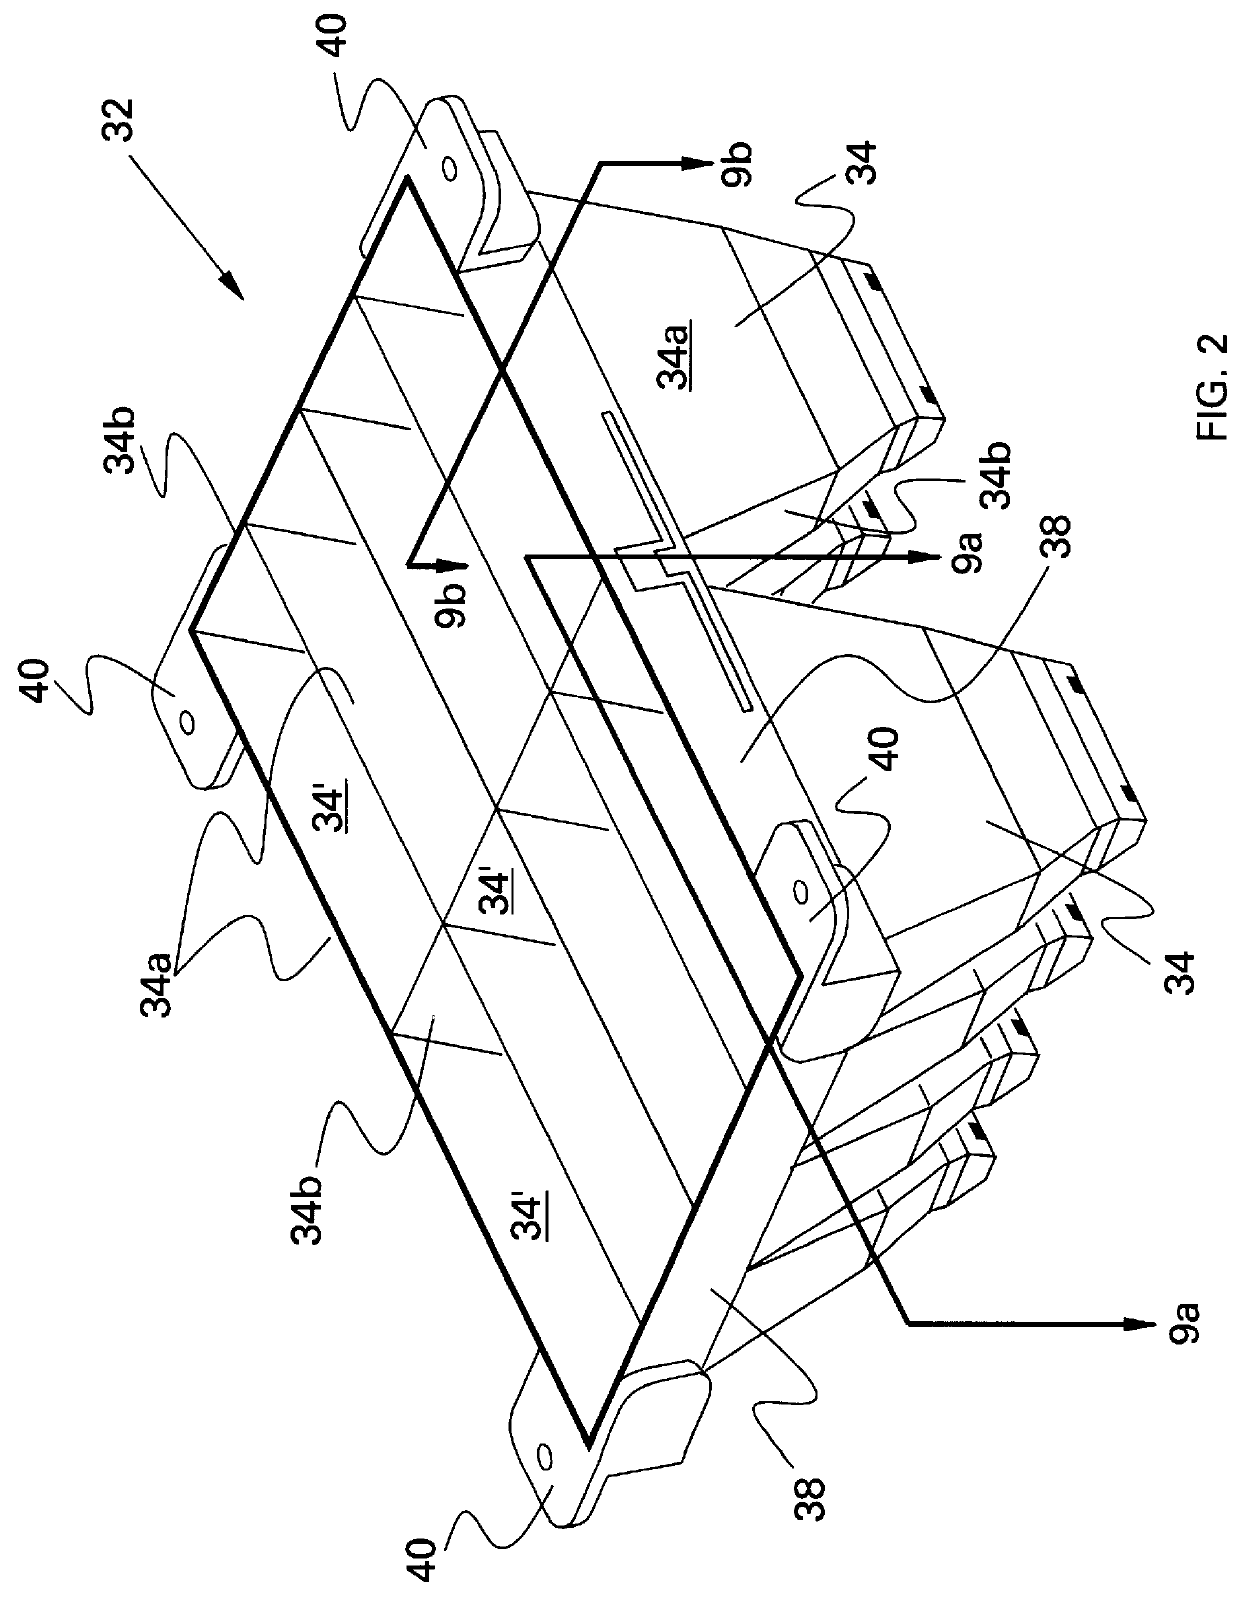 Space concentrator for advanced solar cells